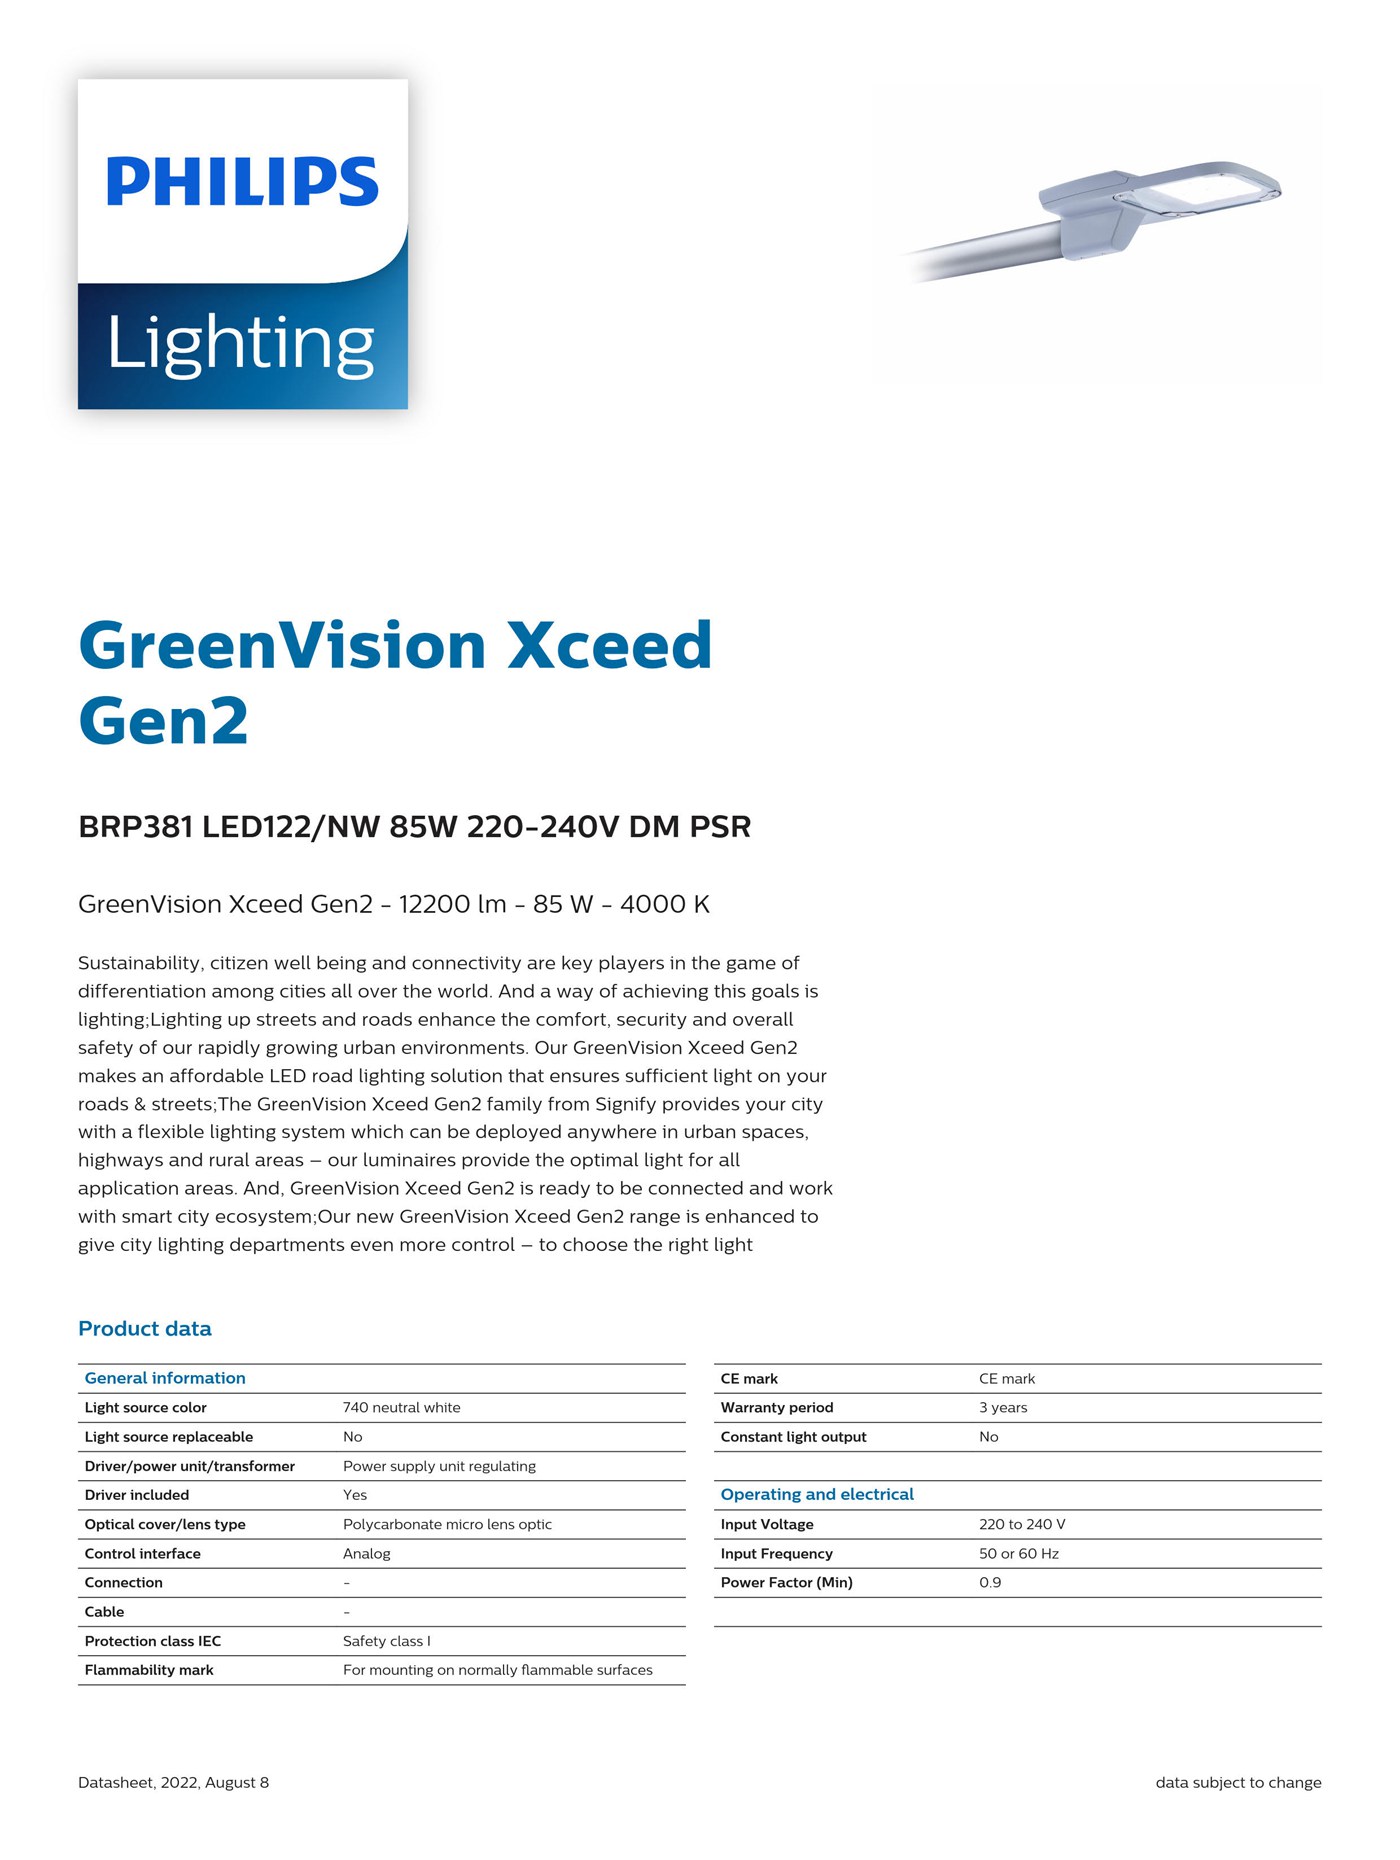 PHILIPS GreenVision Xceed Gen2 BRP381 LED122/NW 85W 220-240V DM PSR 911401875898